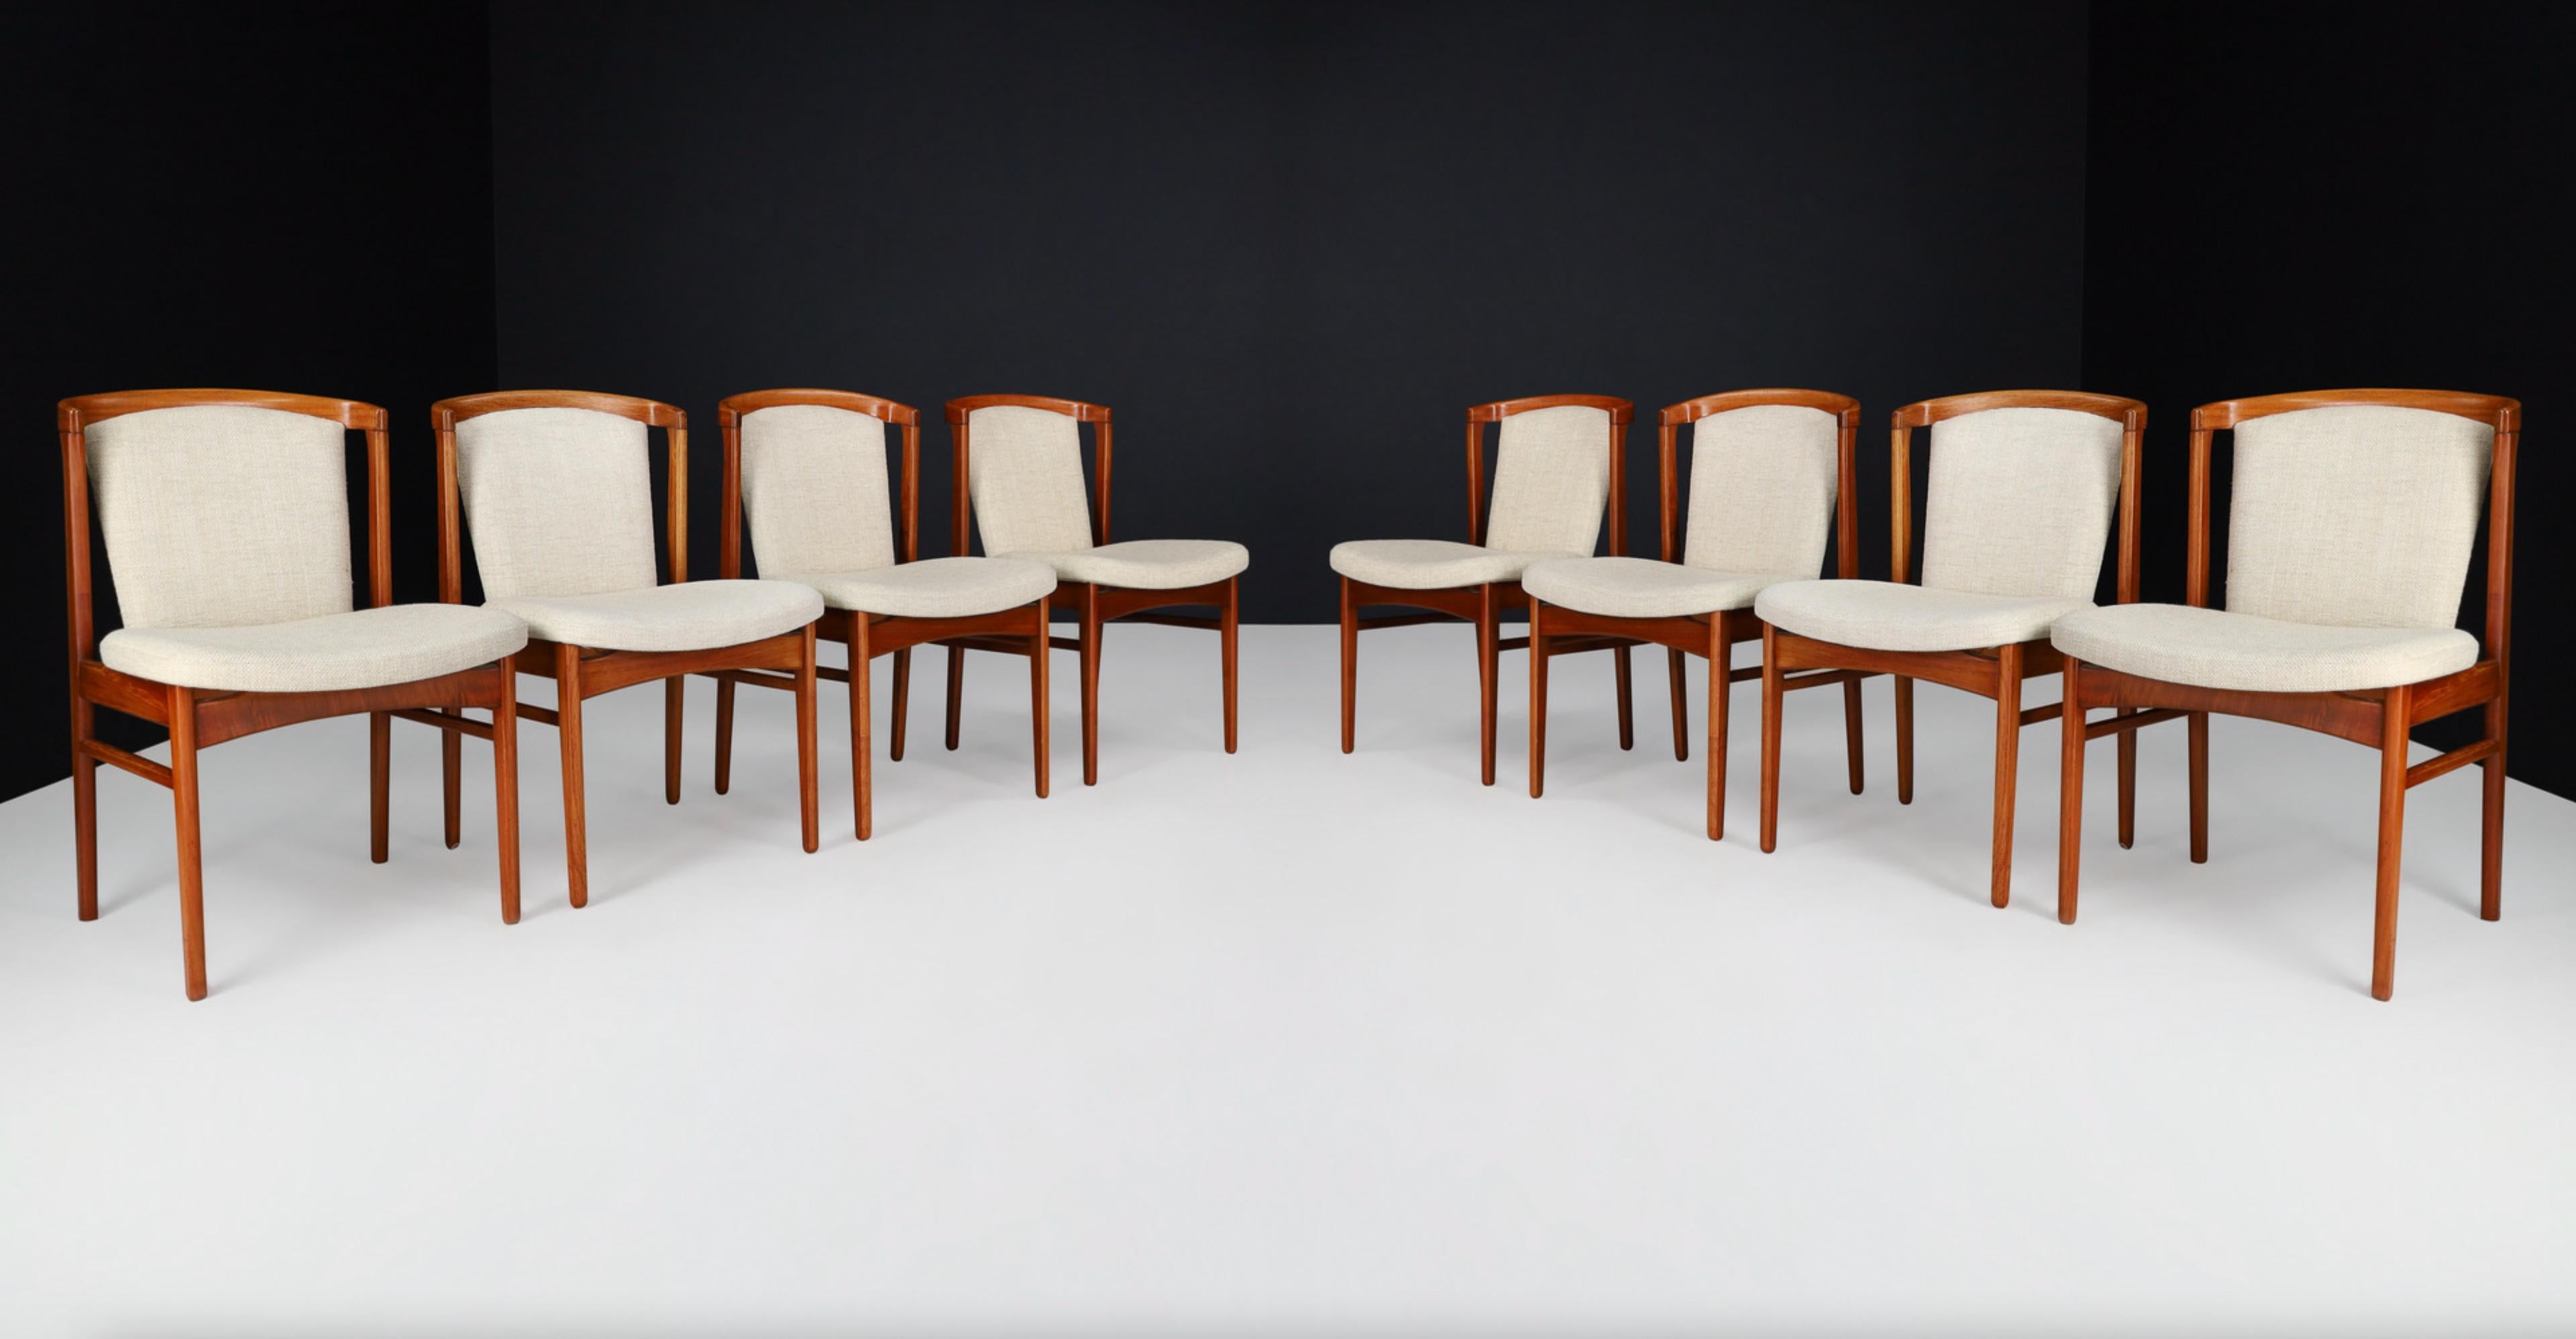 Dining chairs by Erik Buch for Orum Mobler, Denmark, 1960s

As rare as they are aesthetically sensational, this set of eight dining chairs by Erik Buch for Orum Mobler is in 100% original, vintage condition. Extremely comfortable with a unique